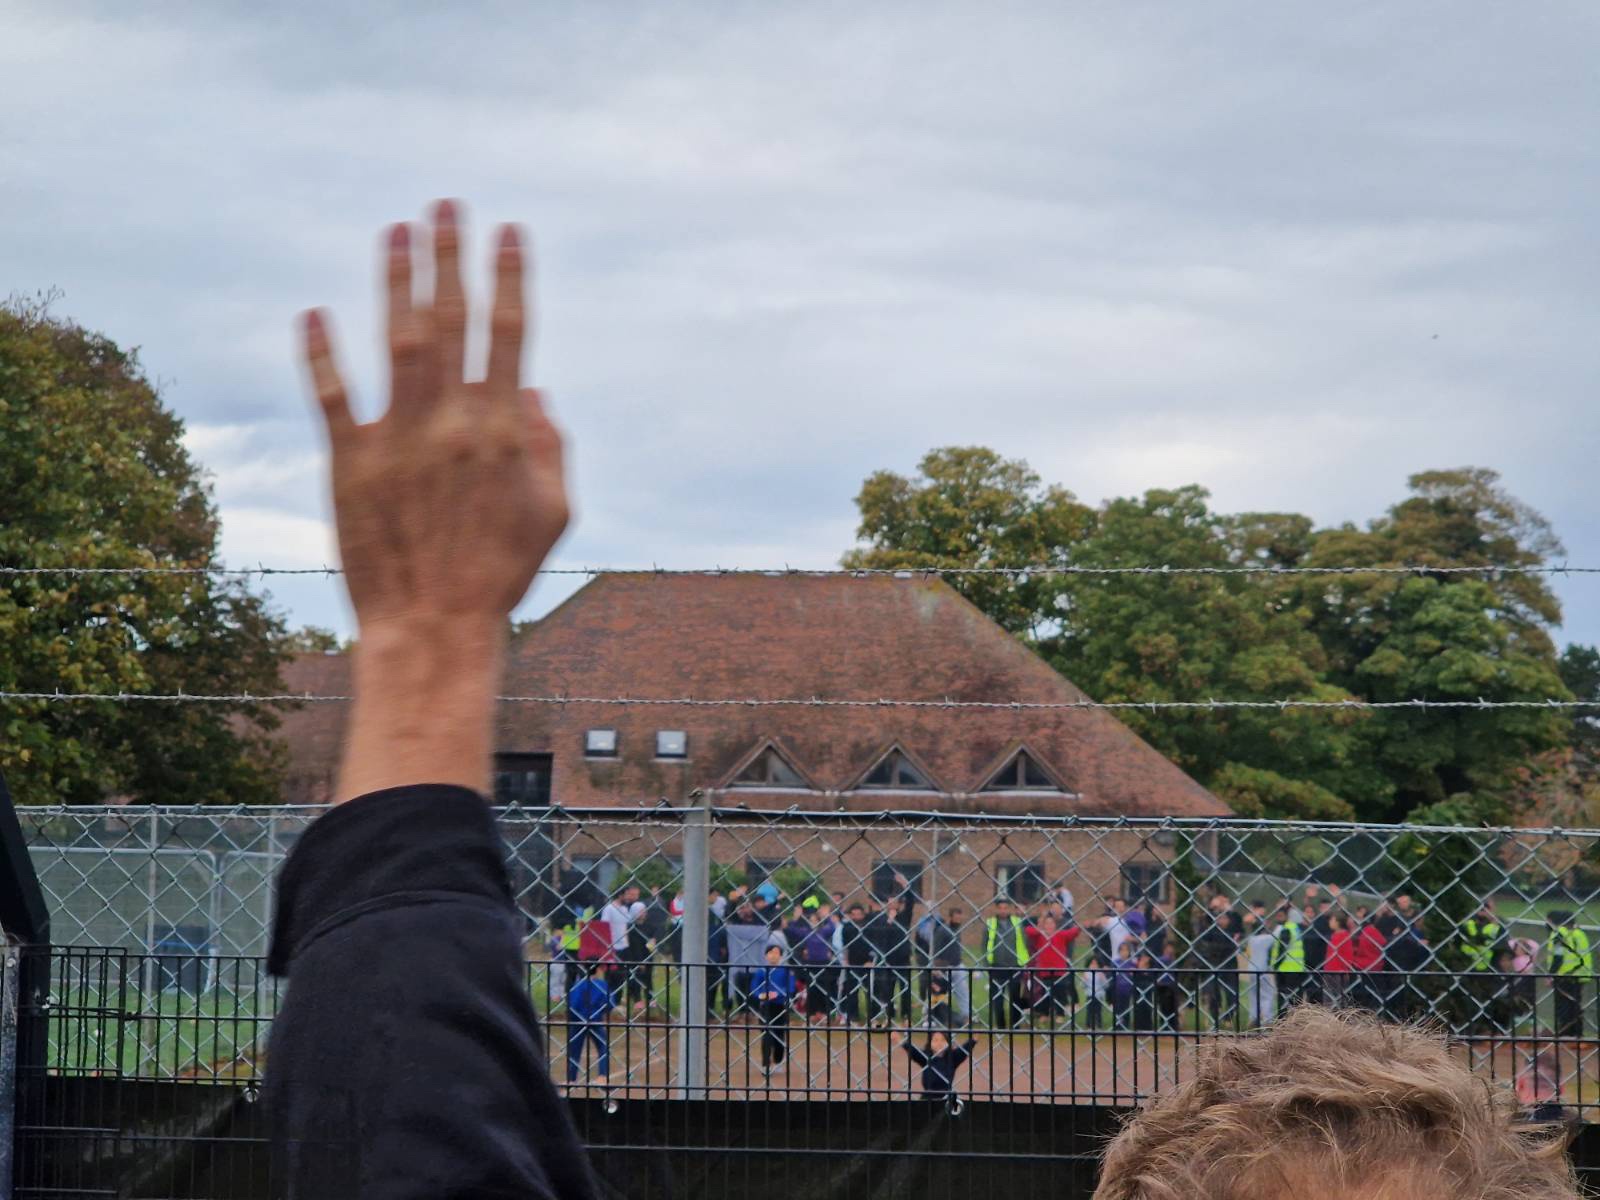 A protester waving to the people and children behind the barbed wire fence at Manston